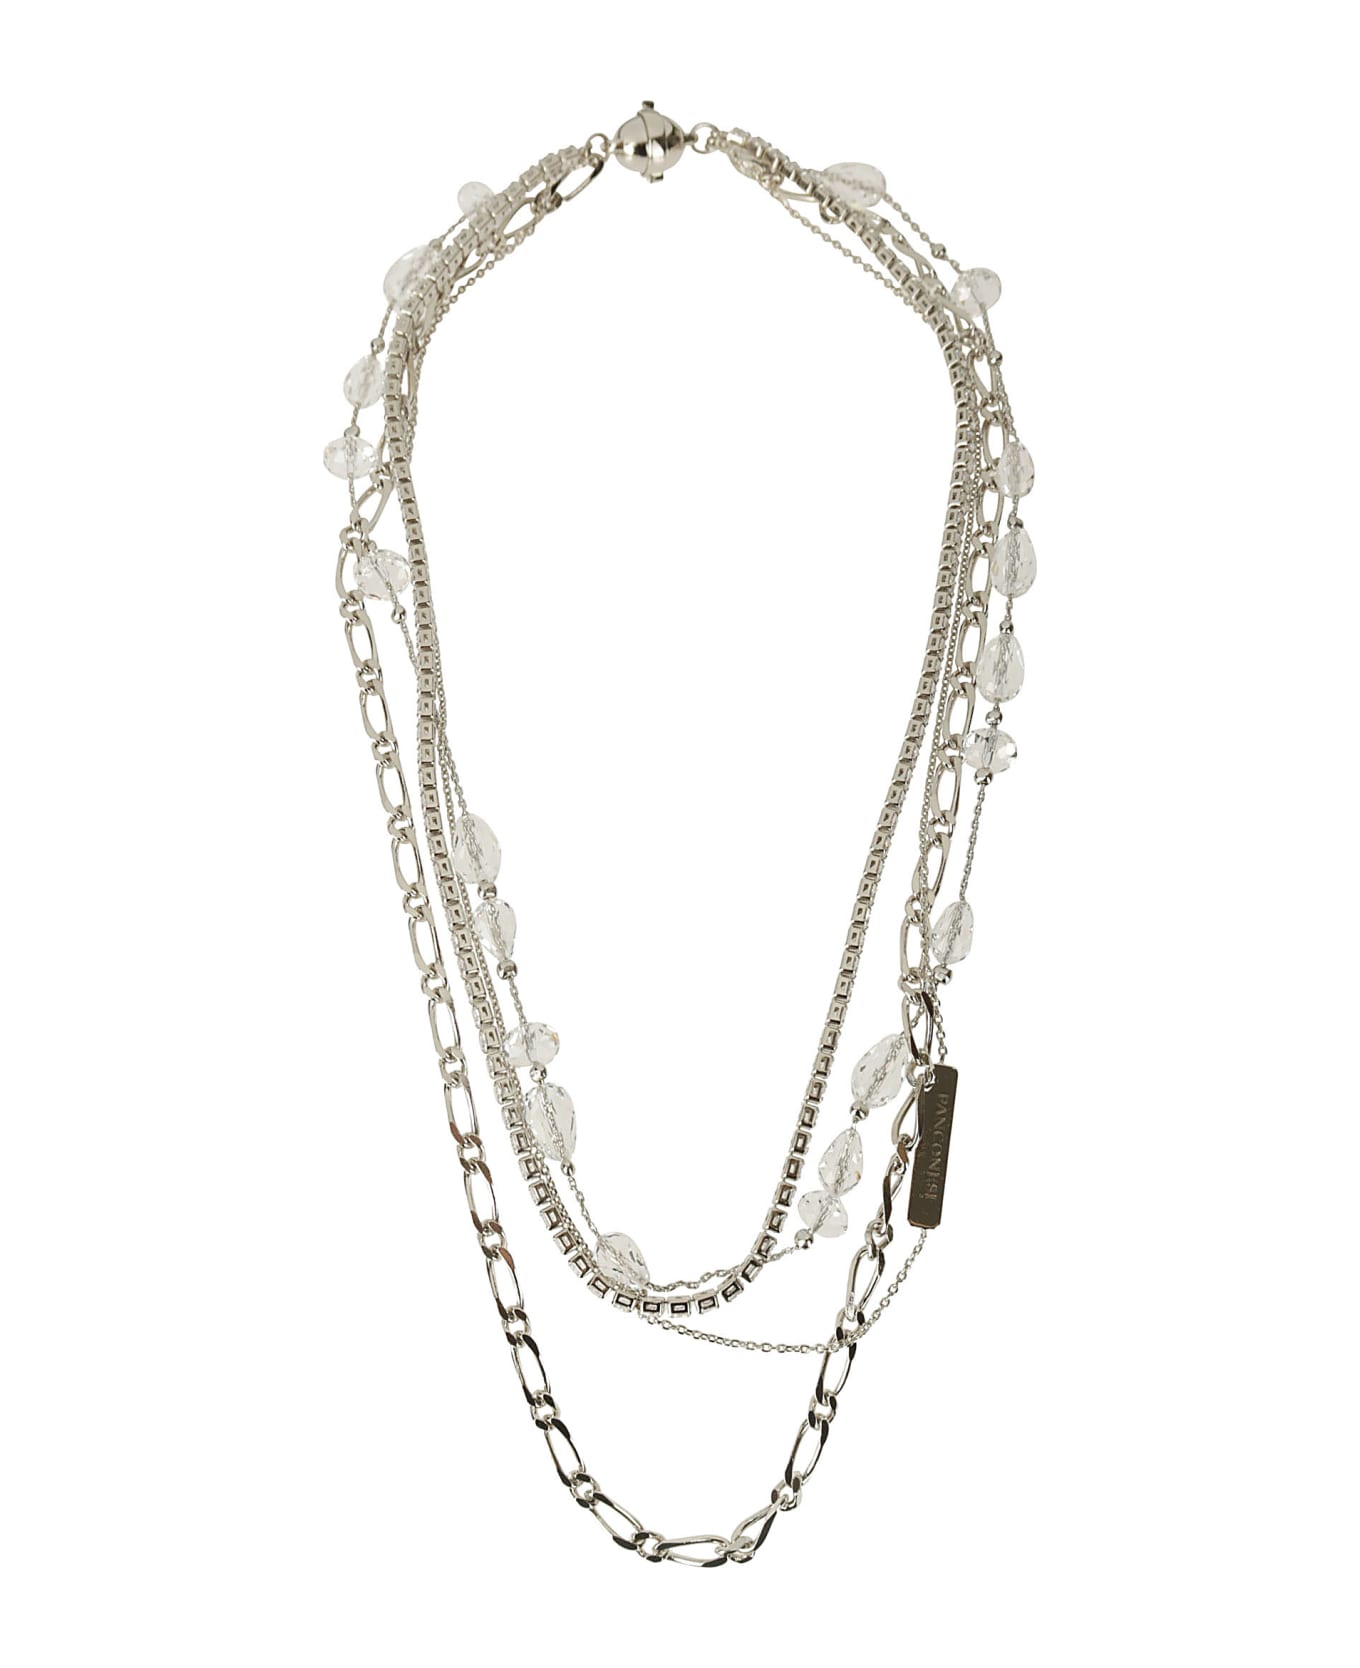 Panconesi Famiglia Silver Necklace - SILVER ネックレス